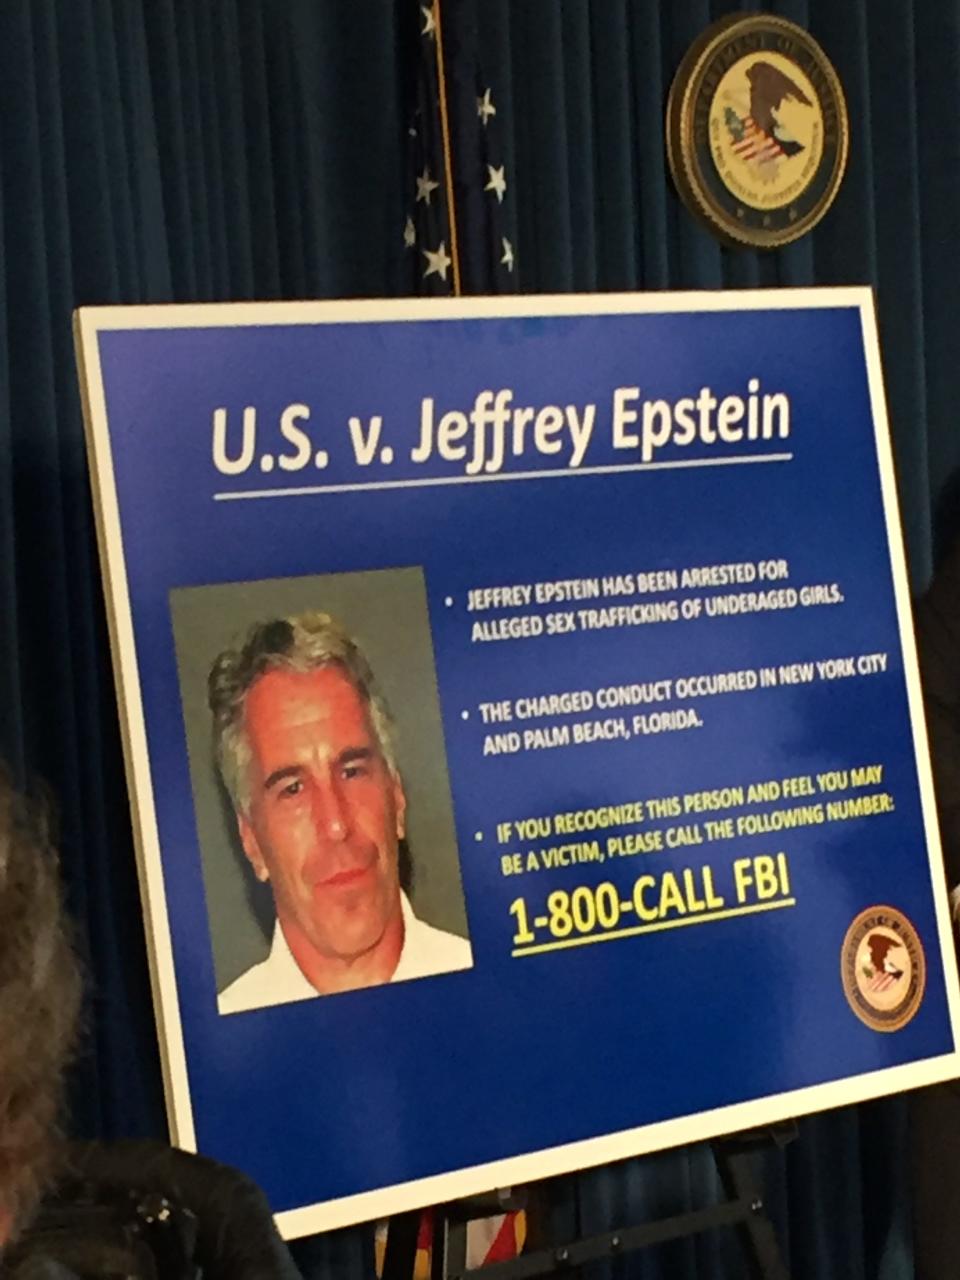 Jeffrey Epstein faces charges of sex trafficking and conspiracy.